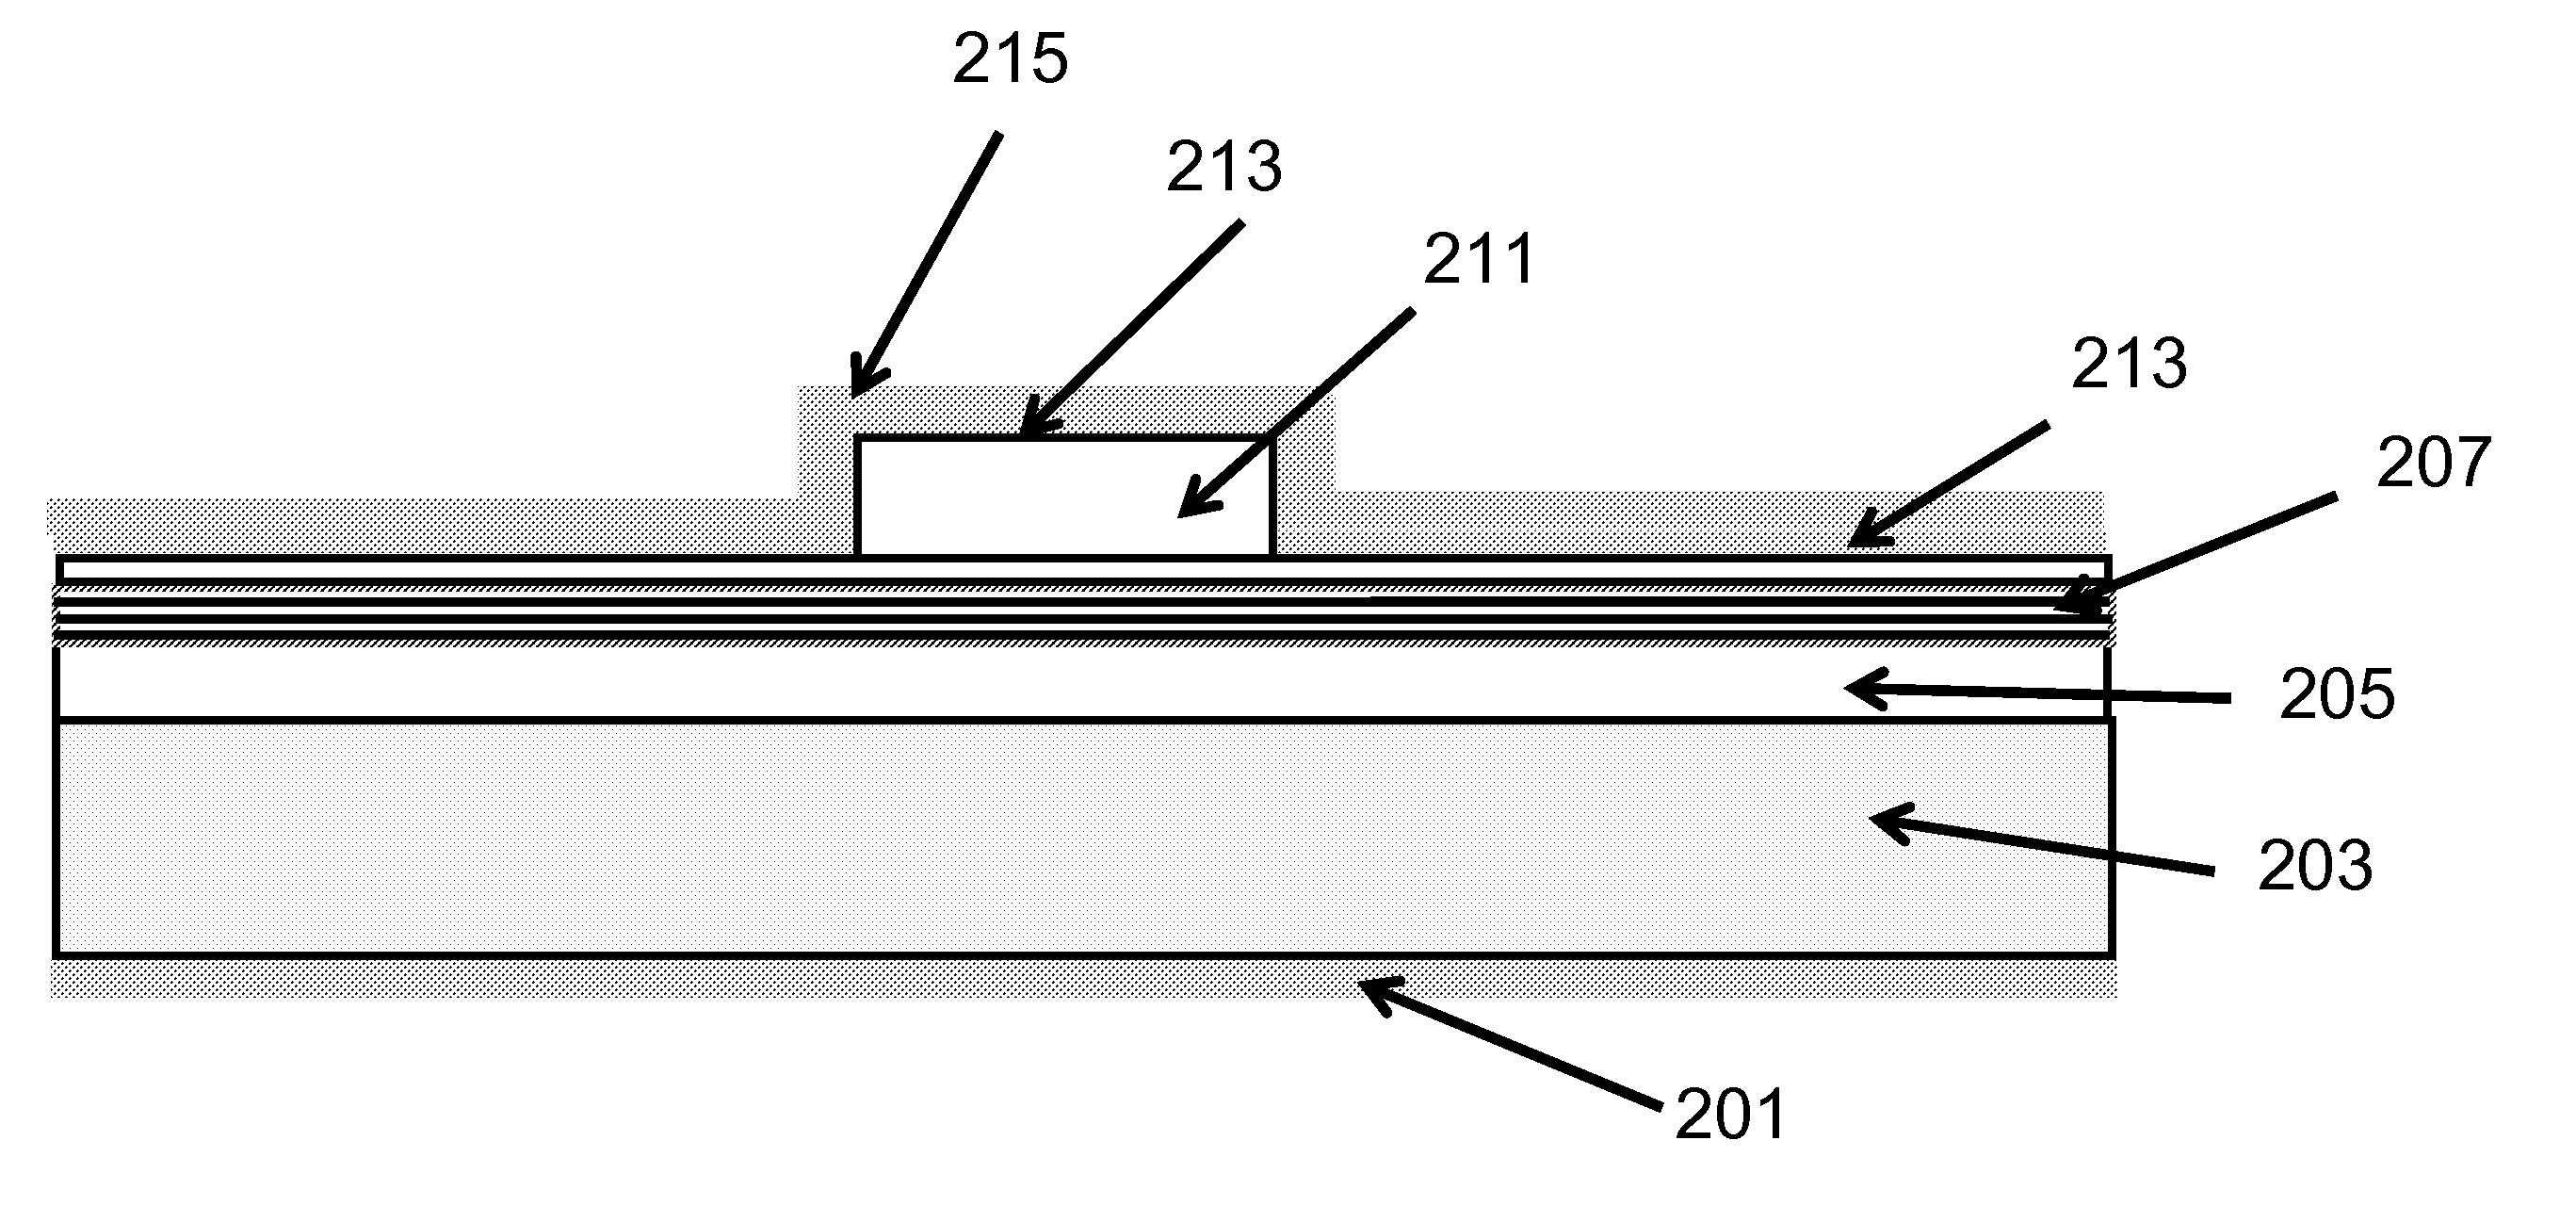 Growth structures and method for forming laser diodes on {30-31} or off cut gallium and nitrogen containing substrates